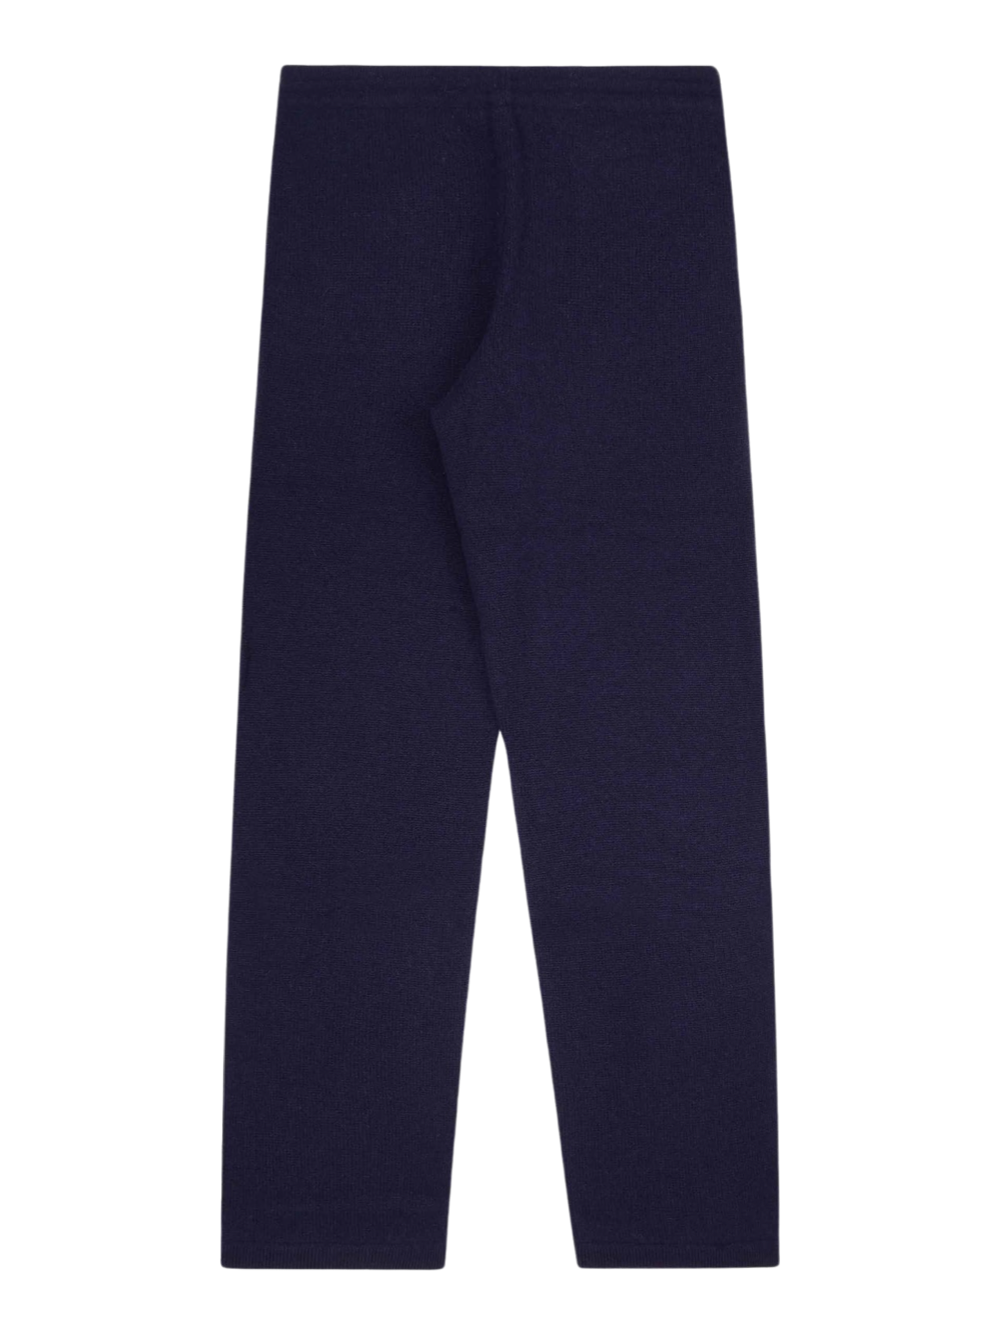 Sporty & Rich Faubourg Cashmere Pants in Navy/White